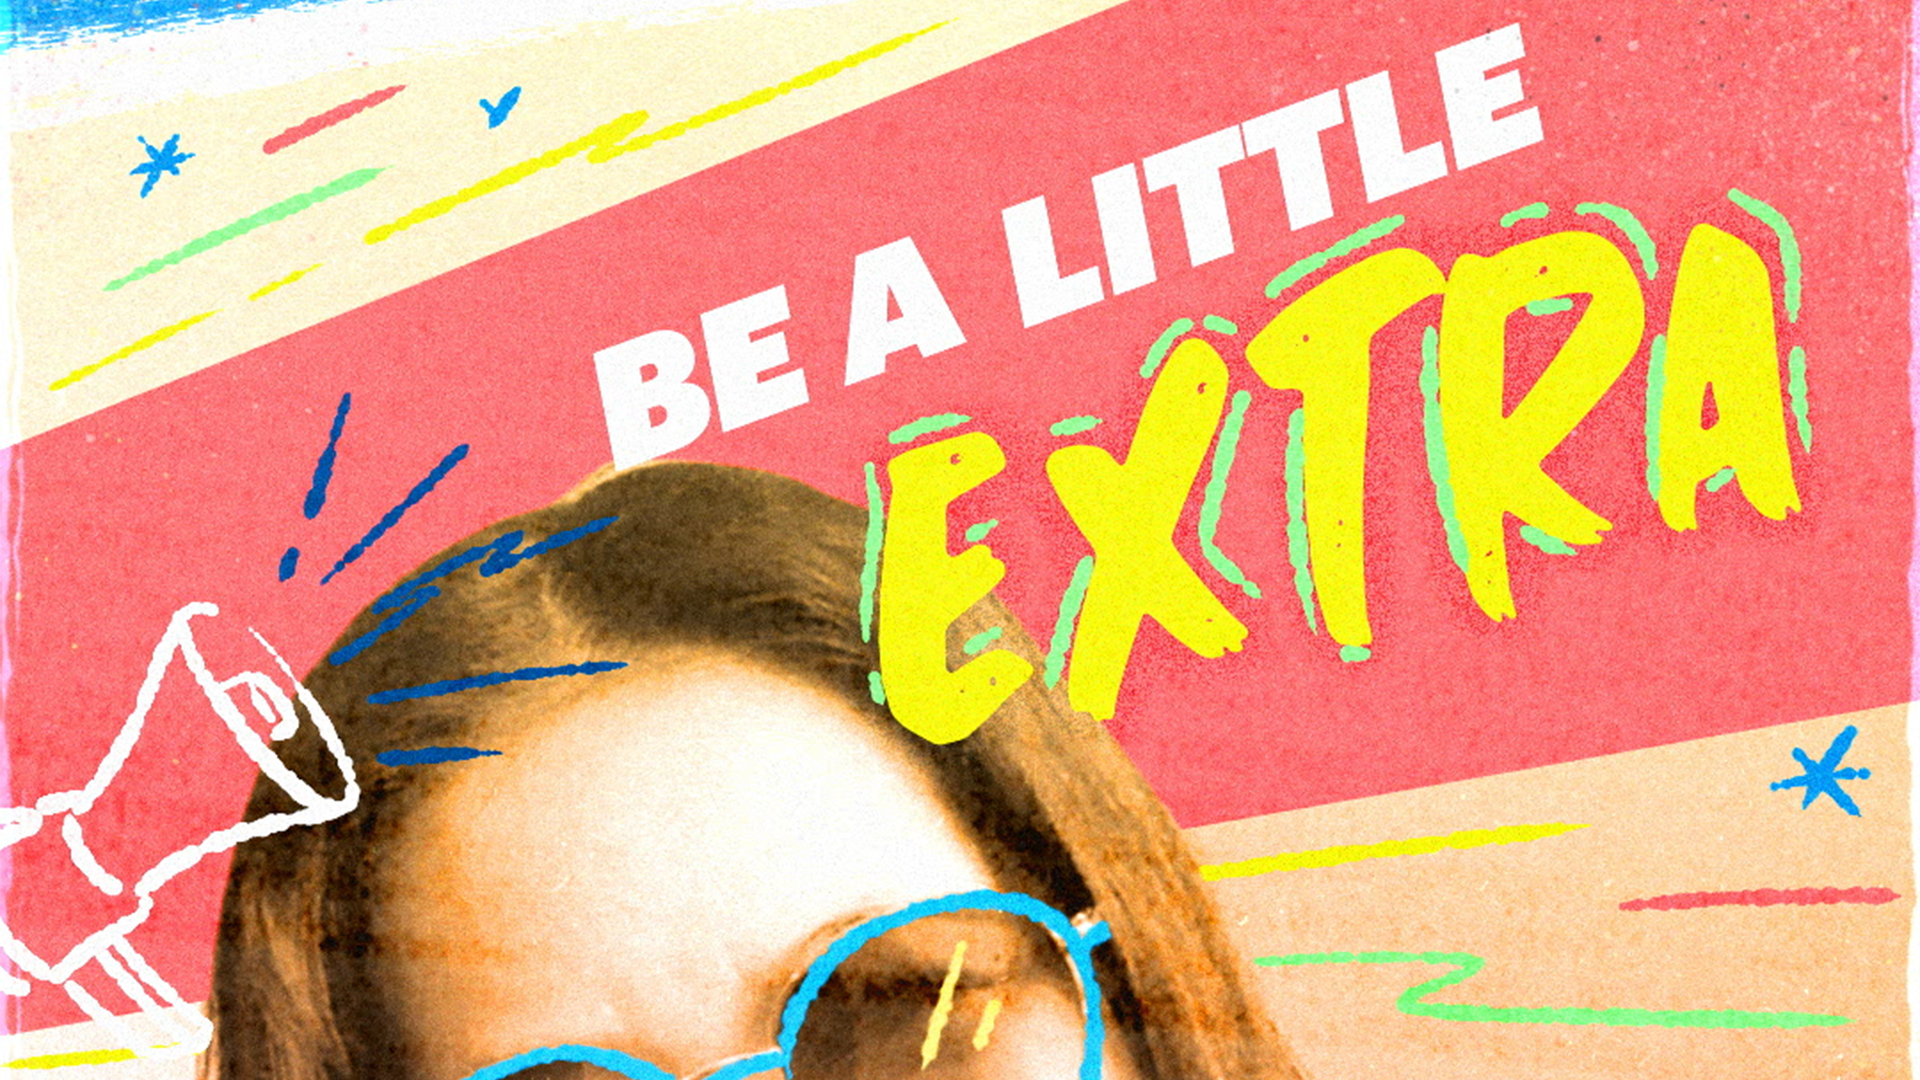 Be a Little Extra